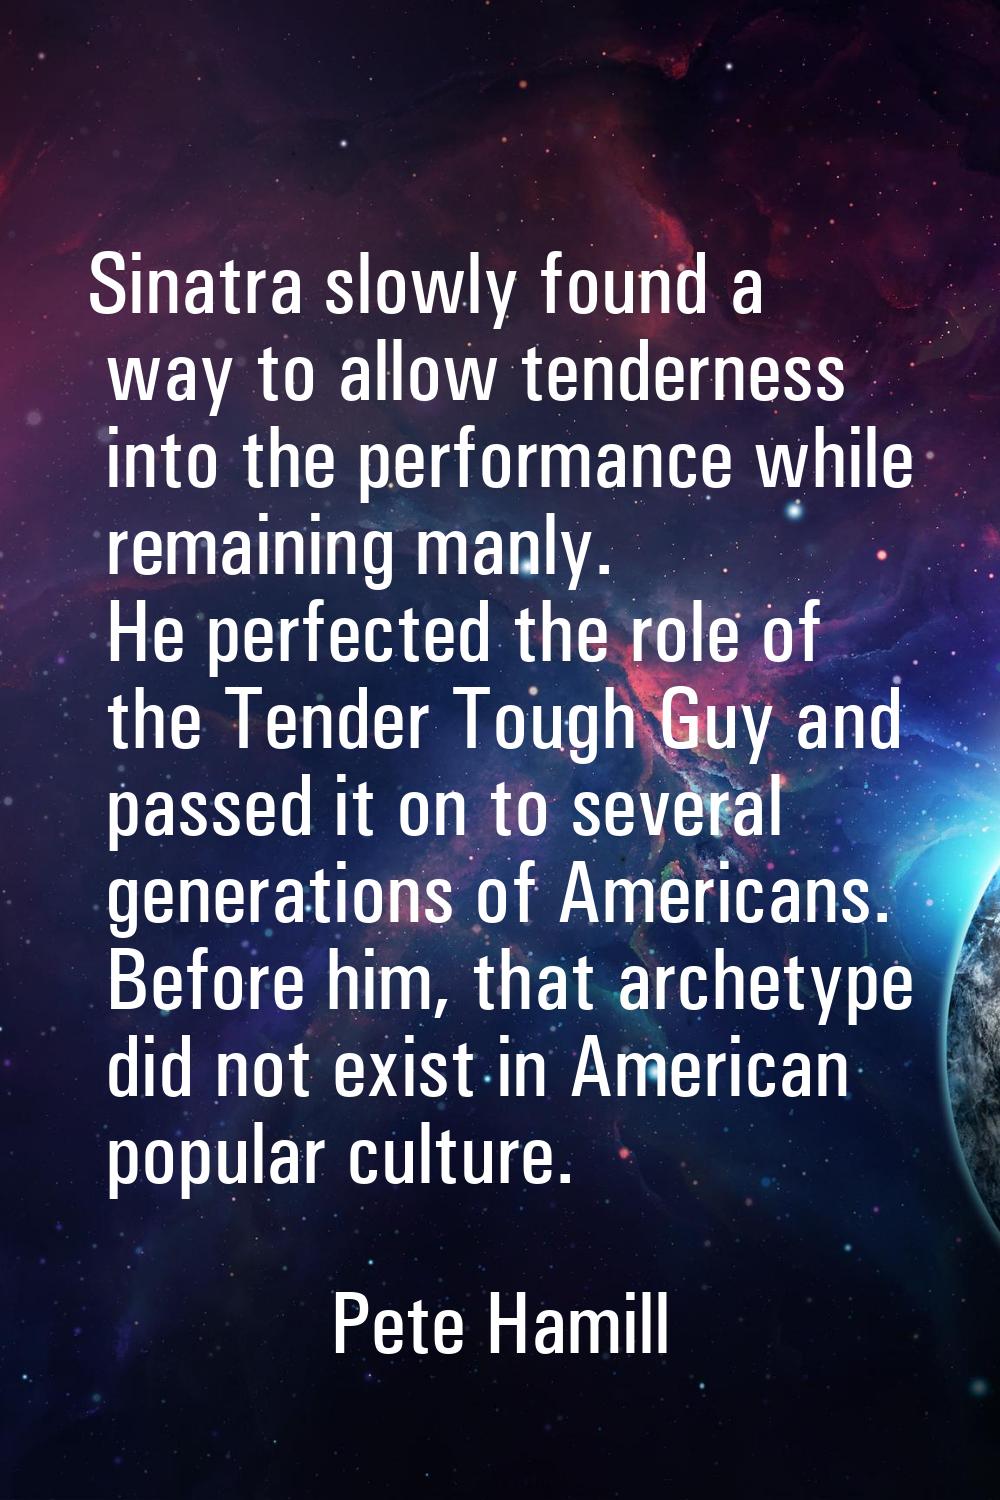 Sinatra slowly found a way to allow tenderness into the performance while remaining manly. He perfe